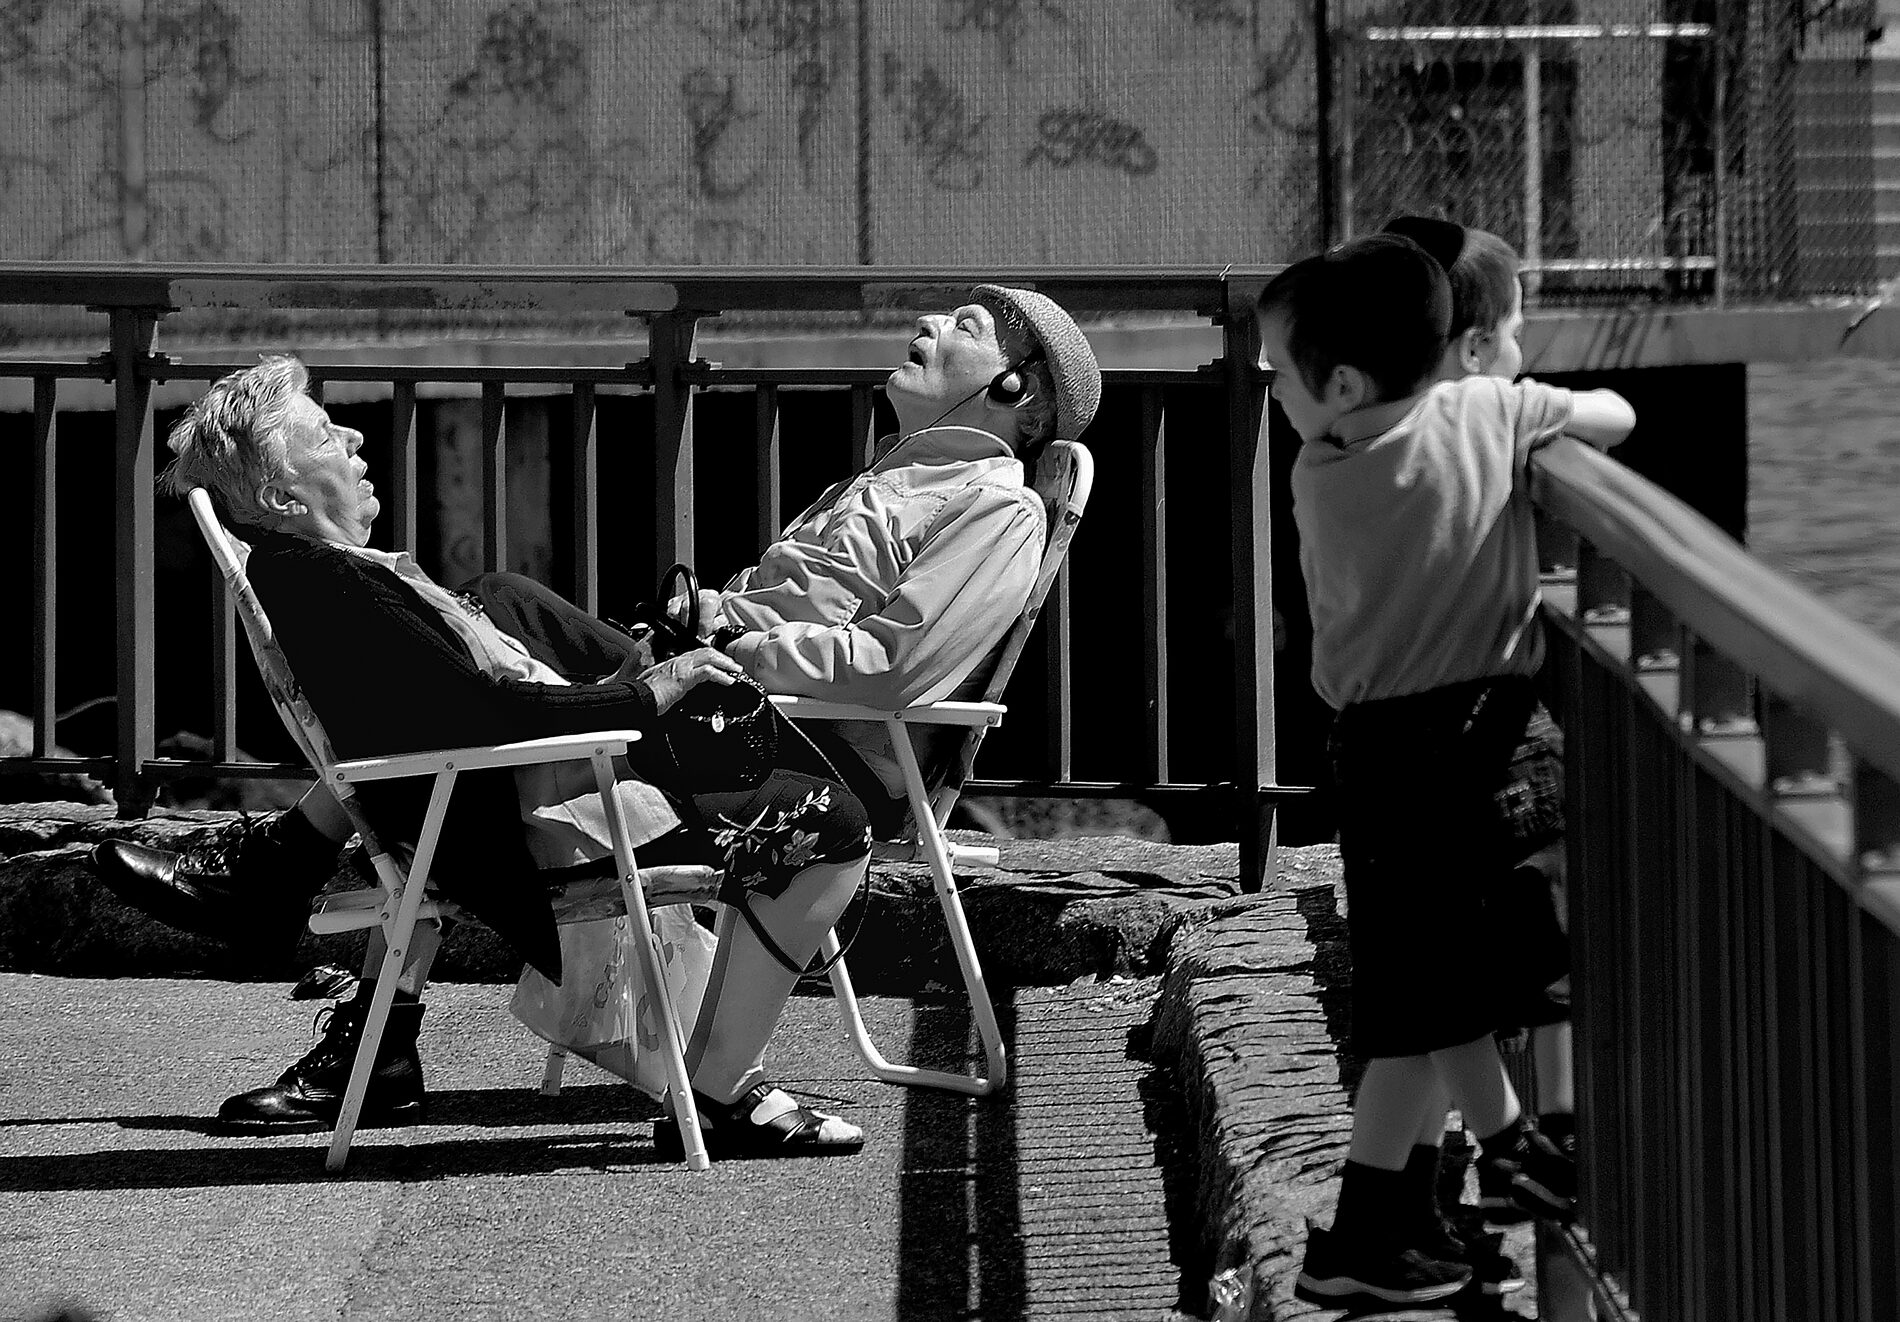 Black and white: Two little boys with yarmulkes leaning on a harbor railing look over at an old man and woman in folding chairs, one with earphones and the other clutching a purse, both conked out in a deep sleep.